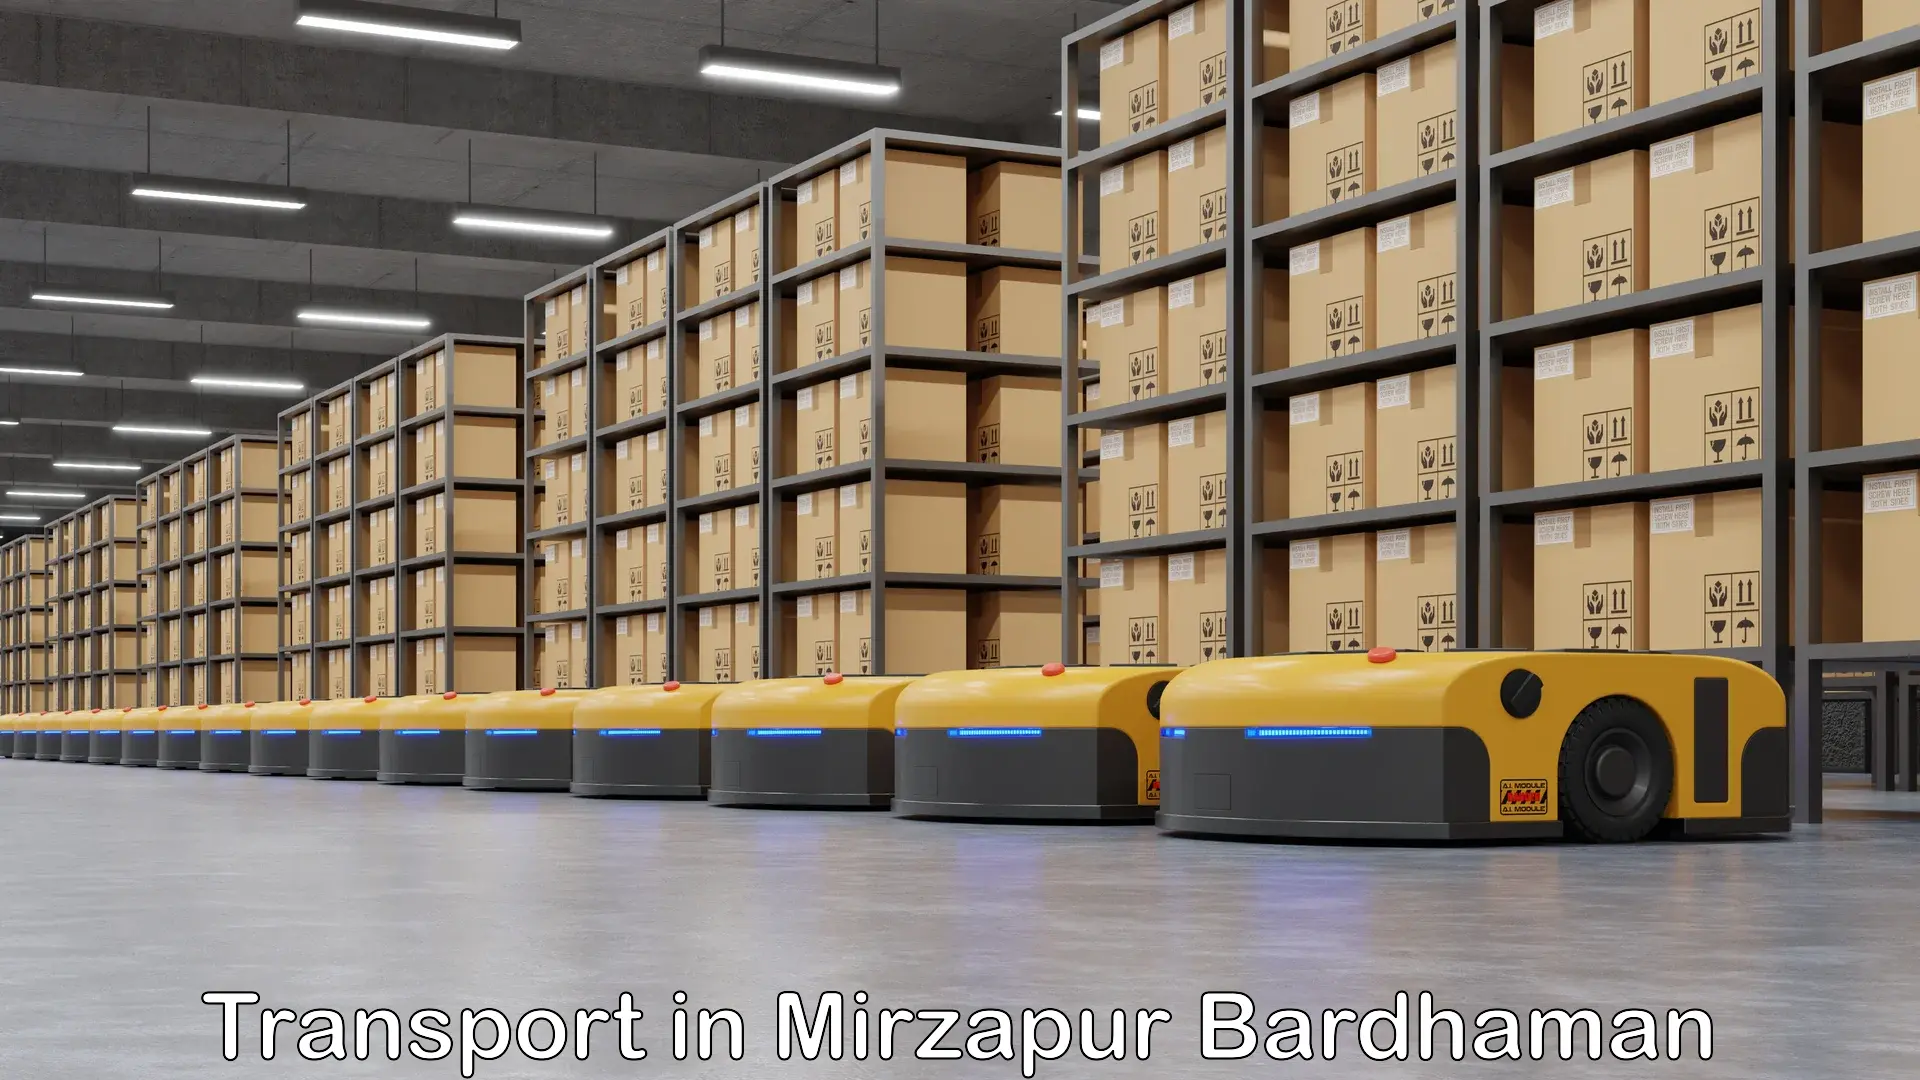 Air freight transport services in Mirzapur Bardhaman